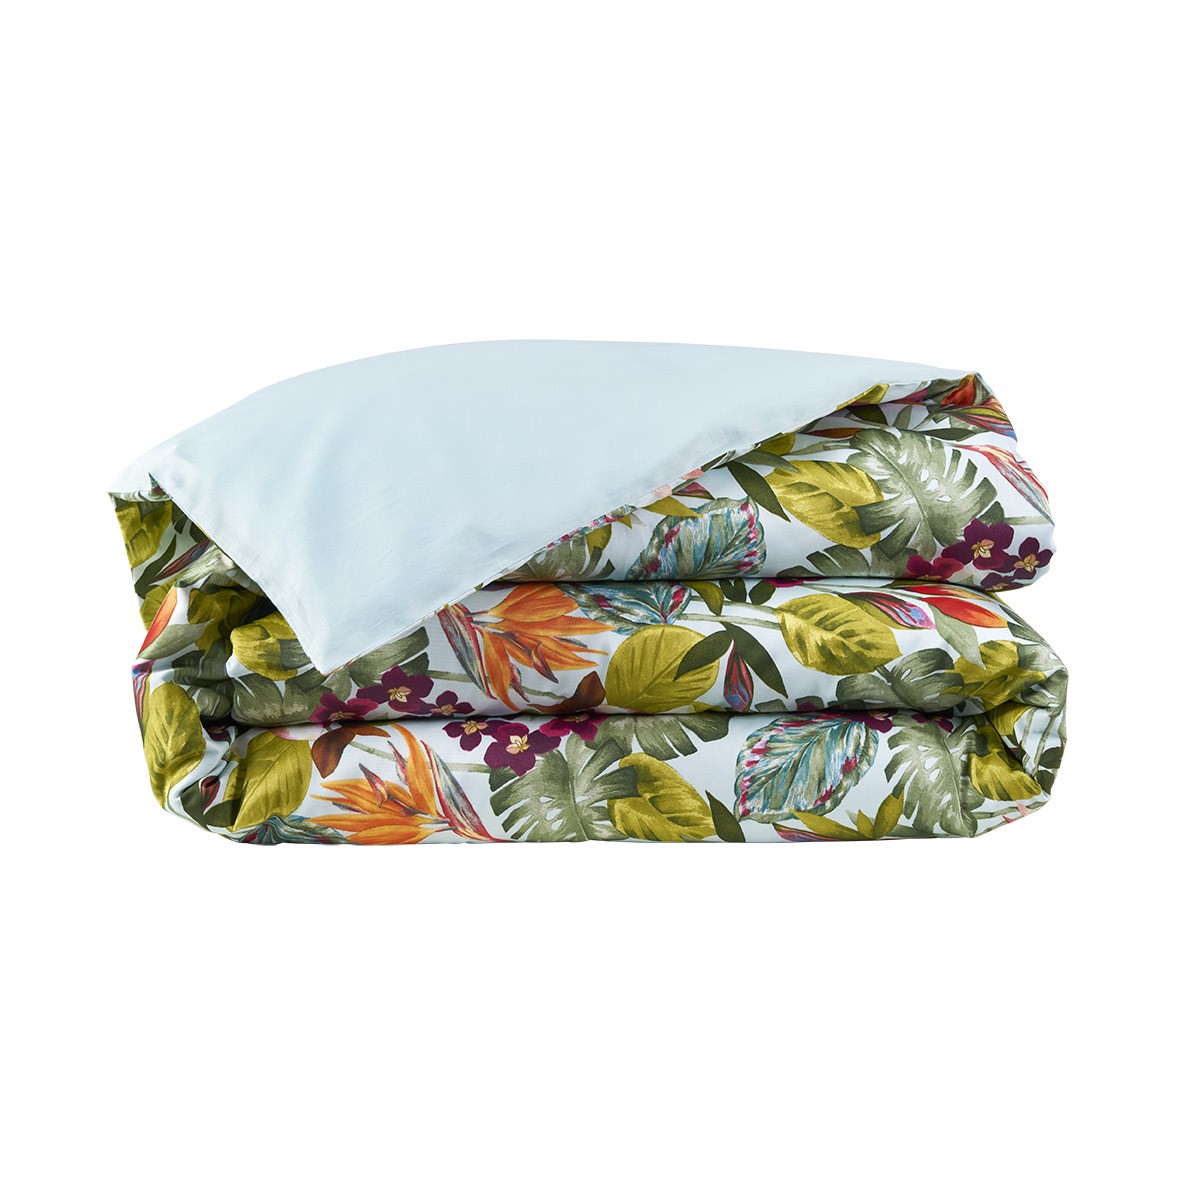 Tropical Opulence: Yves Delorme Utopia Bed Collection in Rich Cotton Sateen